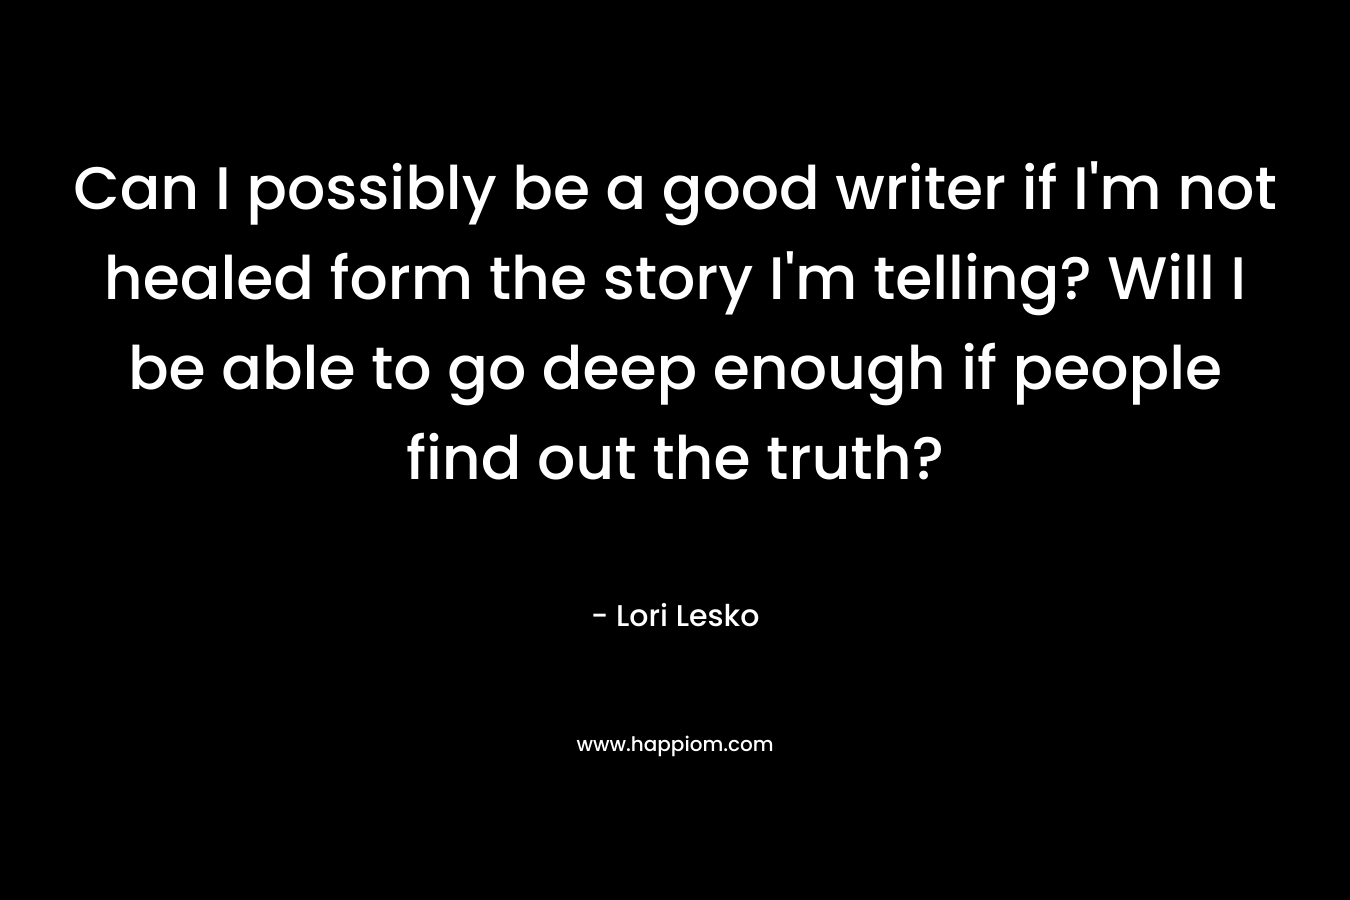 Can I possibly be a good writer if I’m not healed form the story I’m telling? Will I be able to go deep enough if people find out the truth? – Lori Lesko